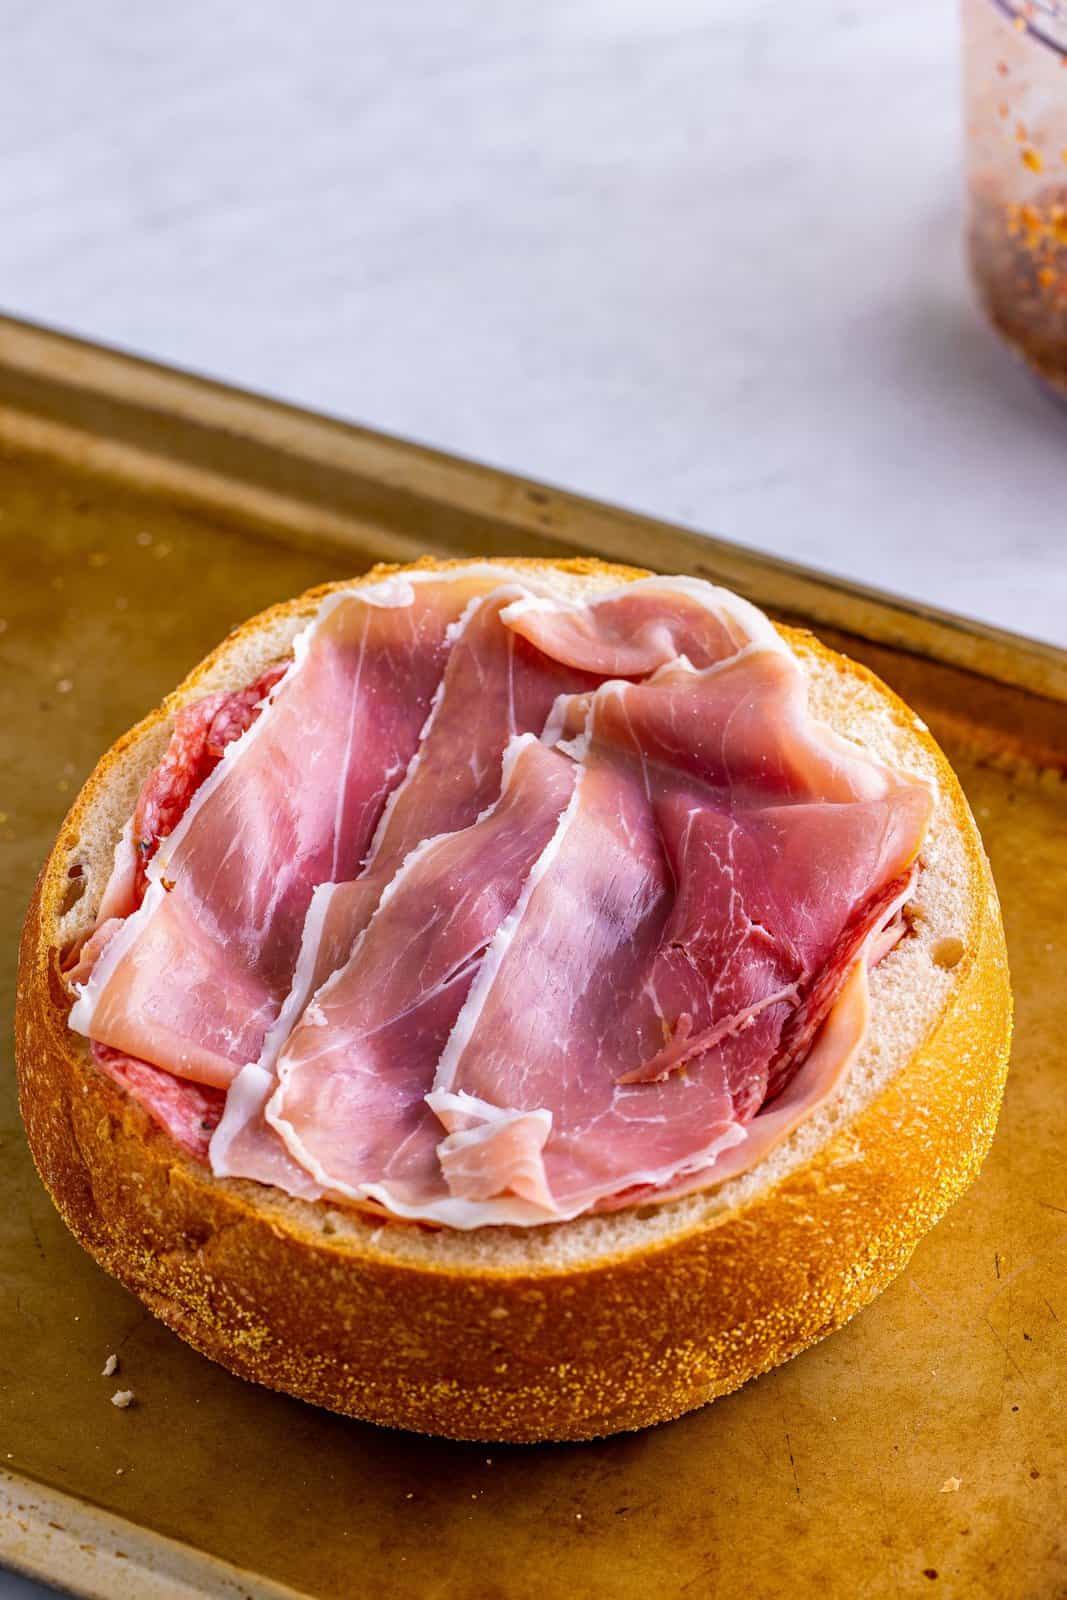 Ham, salami, and prosciutto layered over the cheese and olive spread in bread.